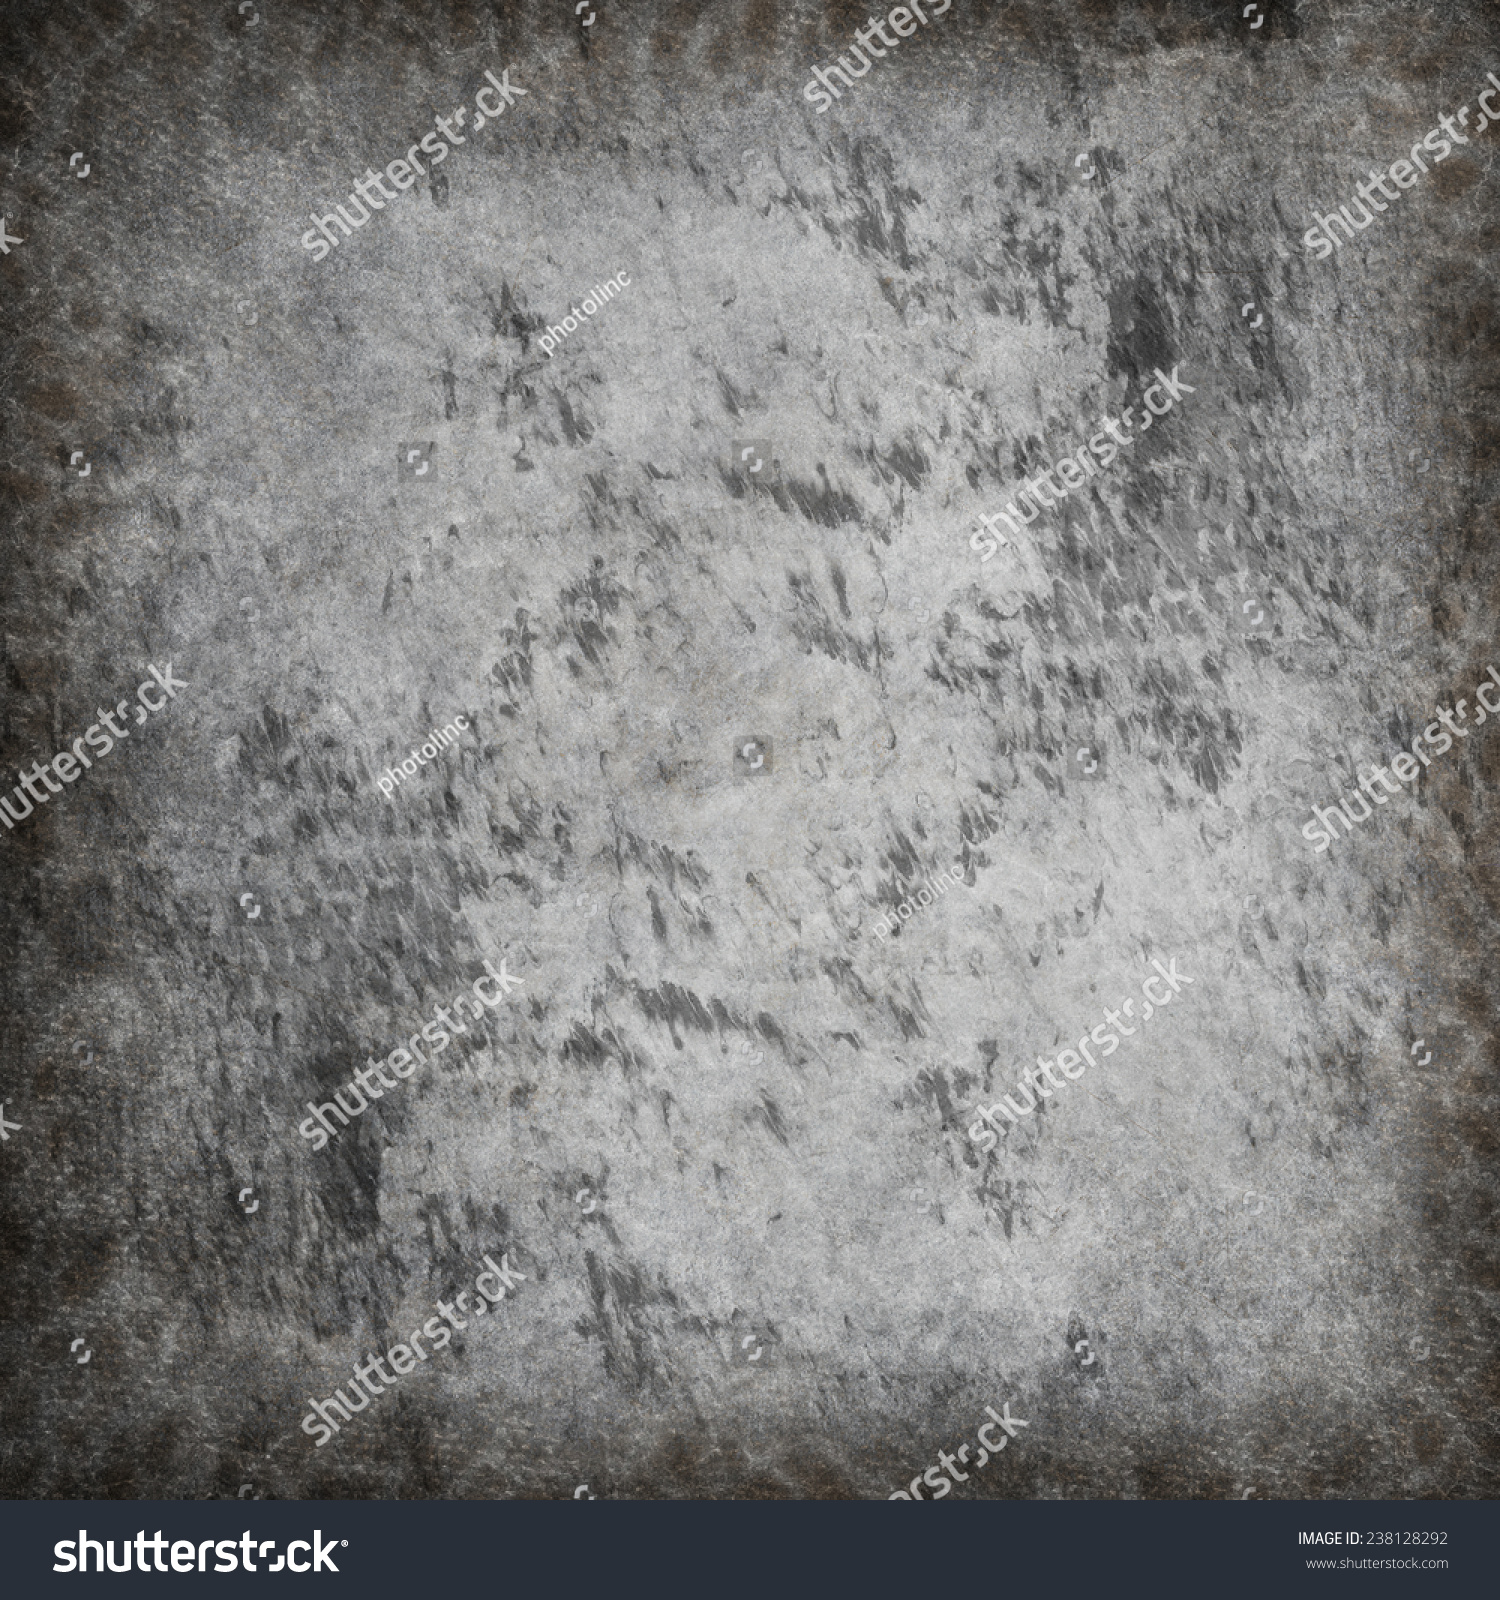 retro background with texture of old paper #238128292